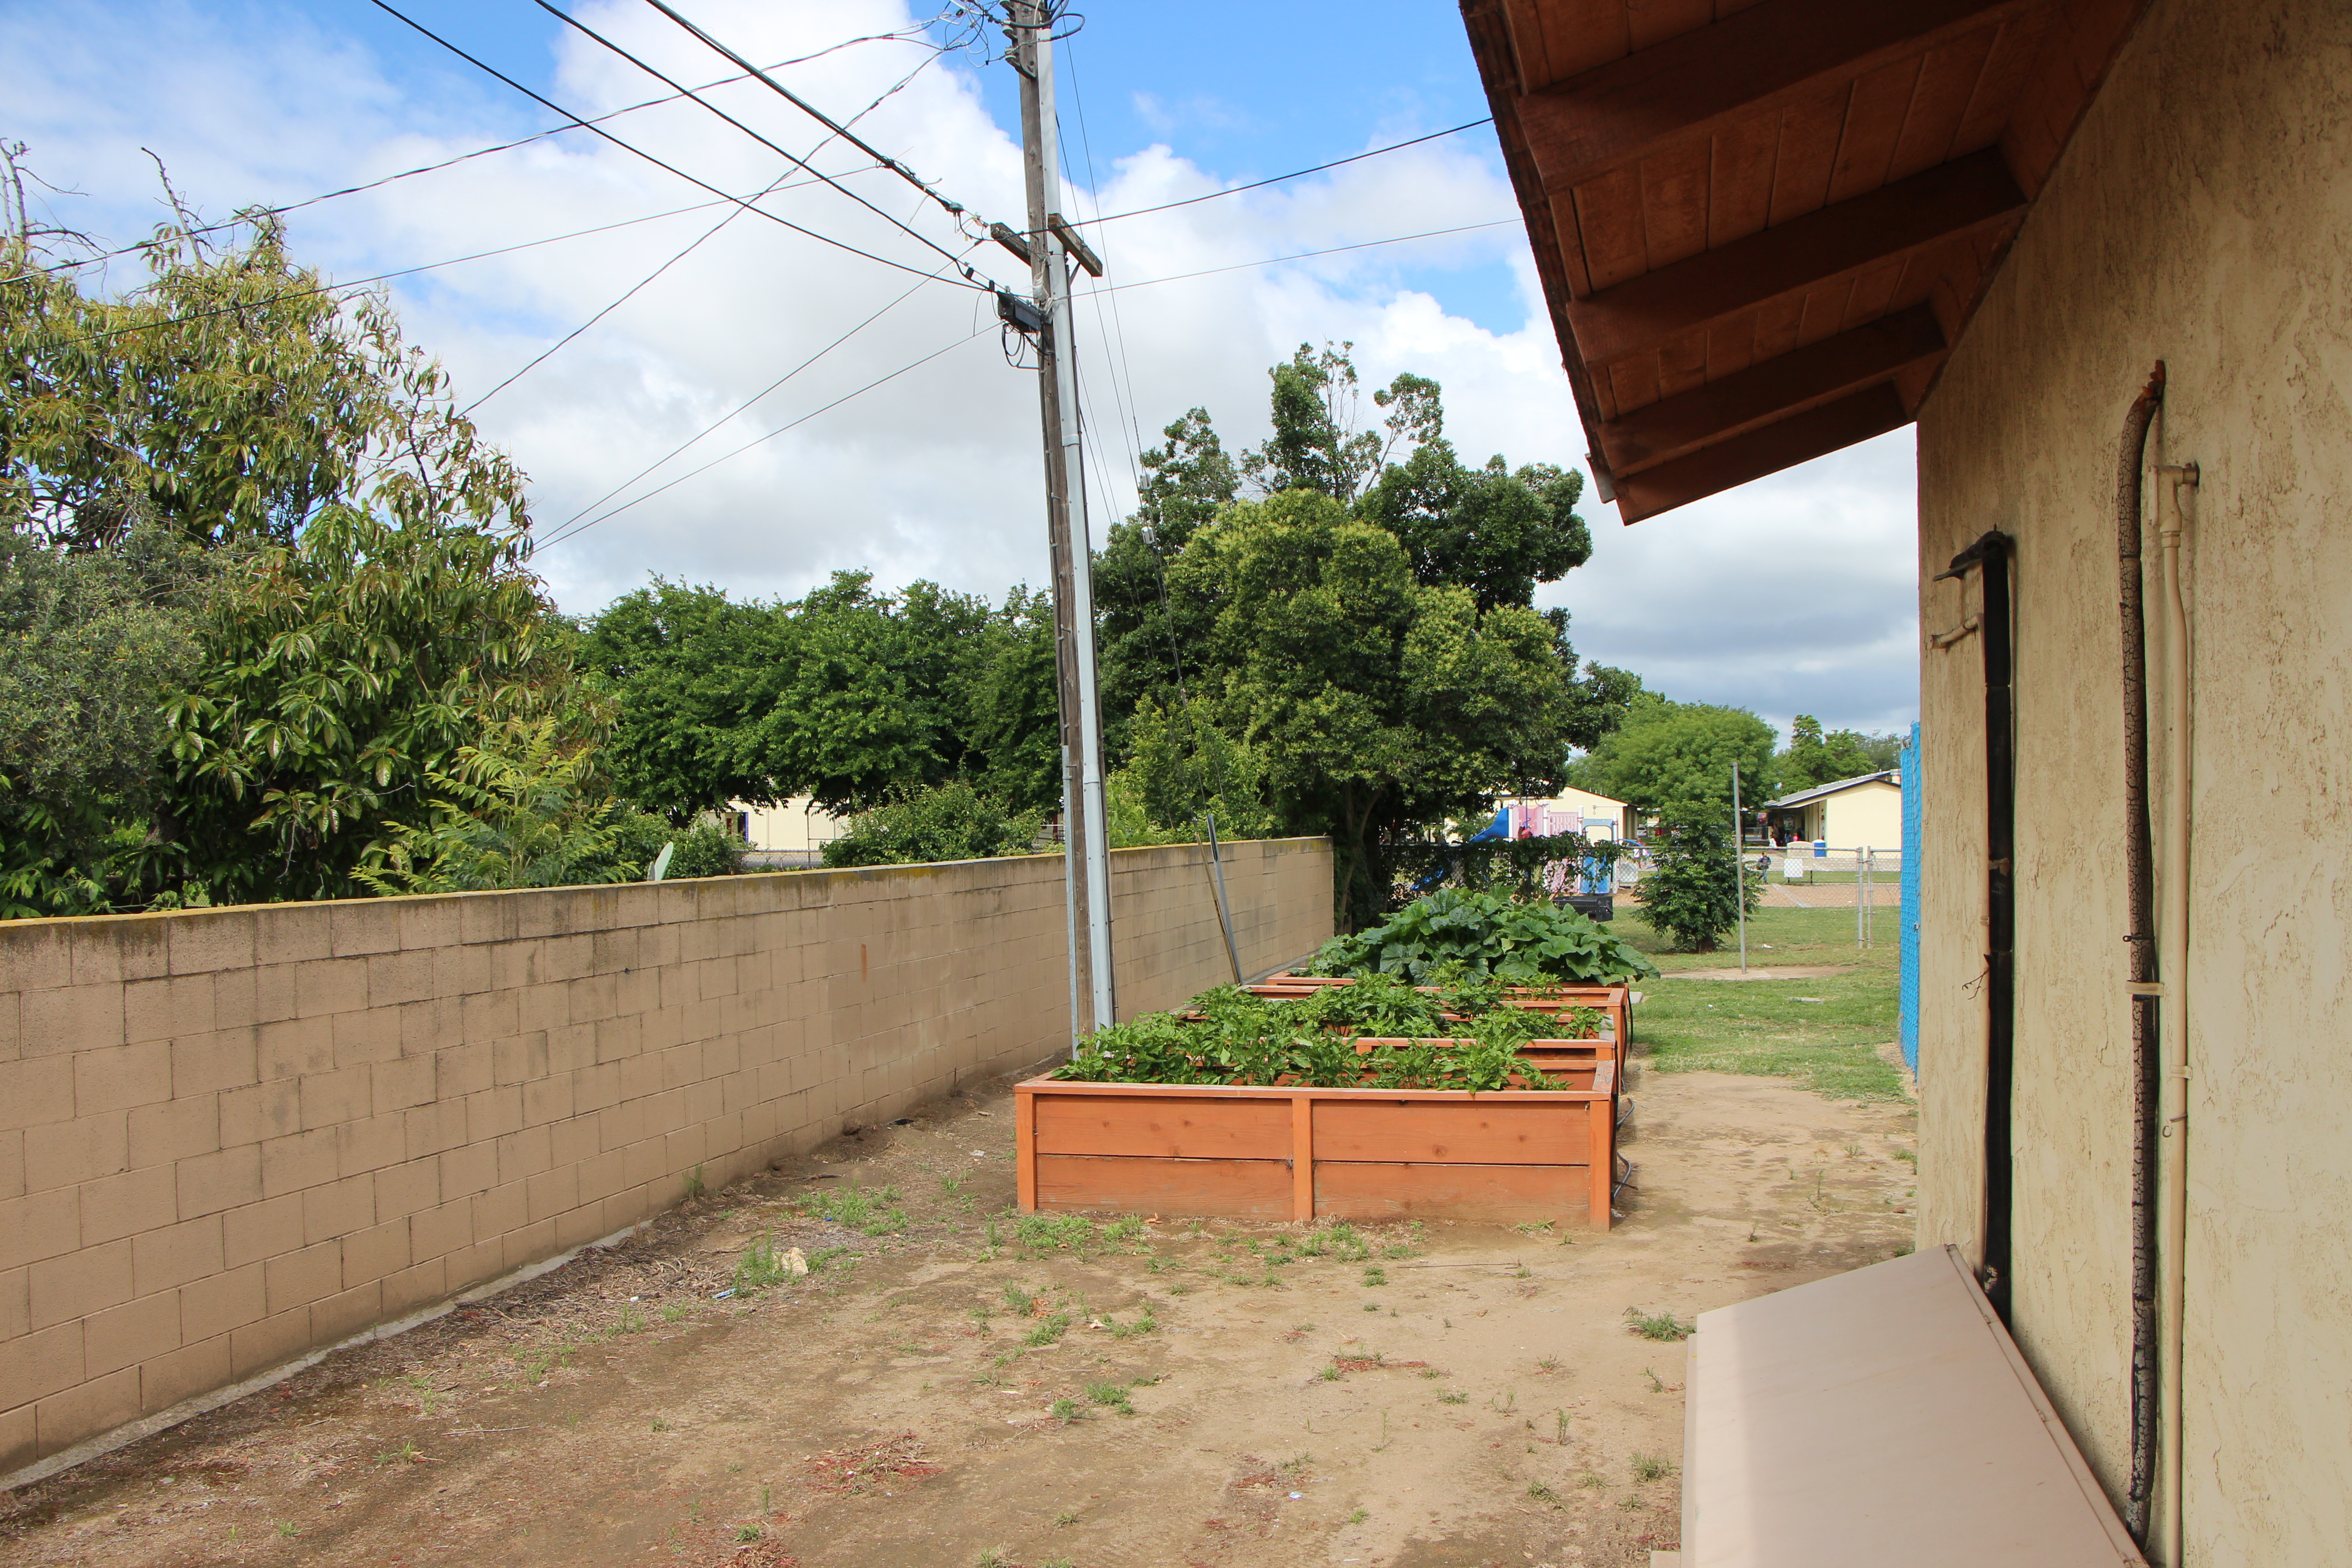 Project #14: Inside Out Community Garden